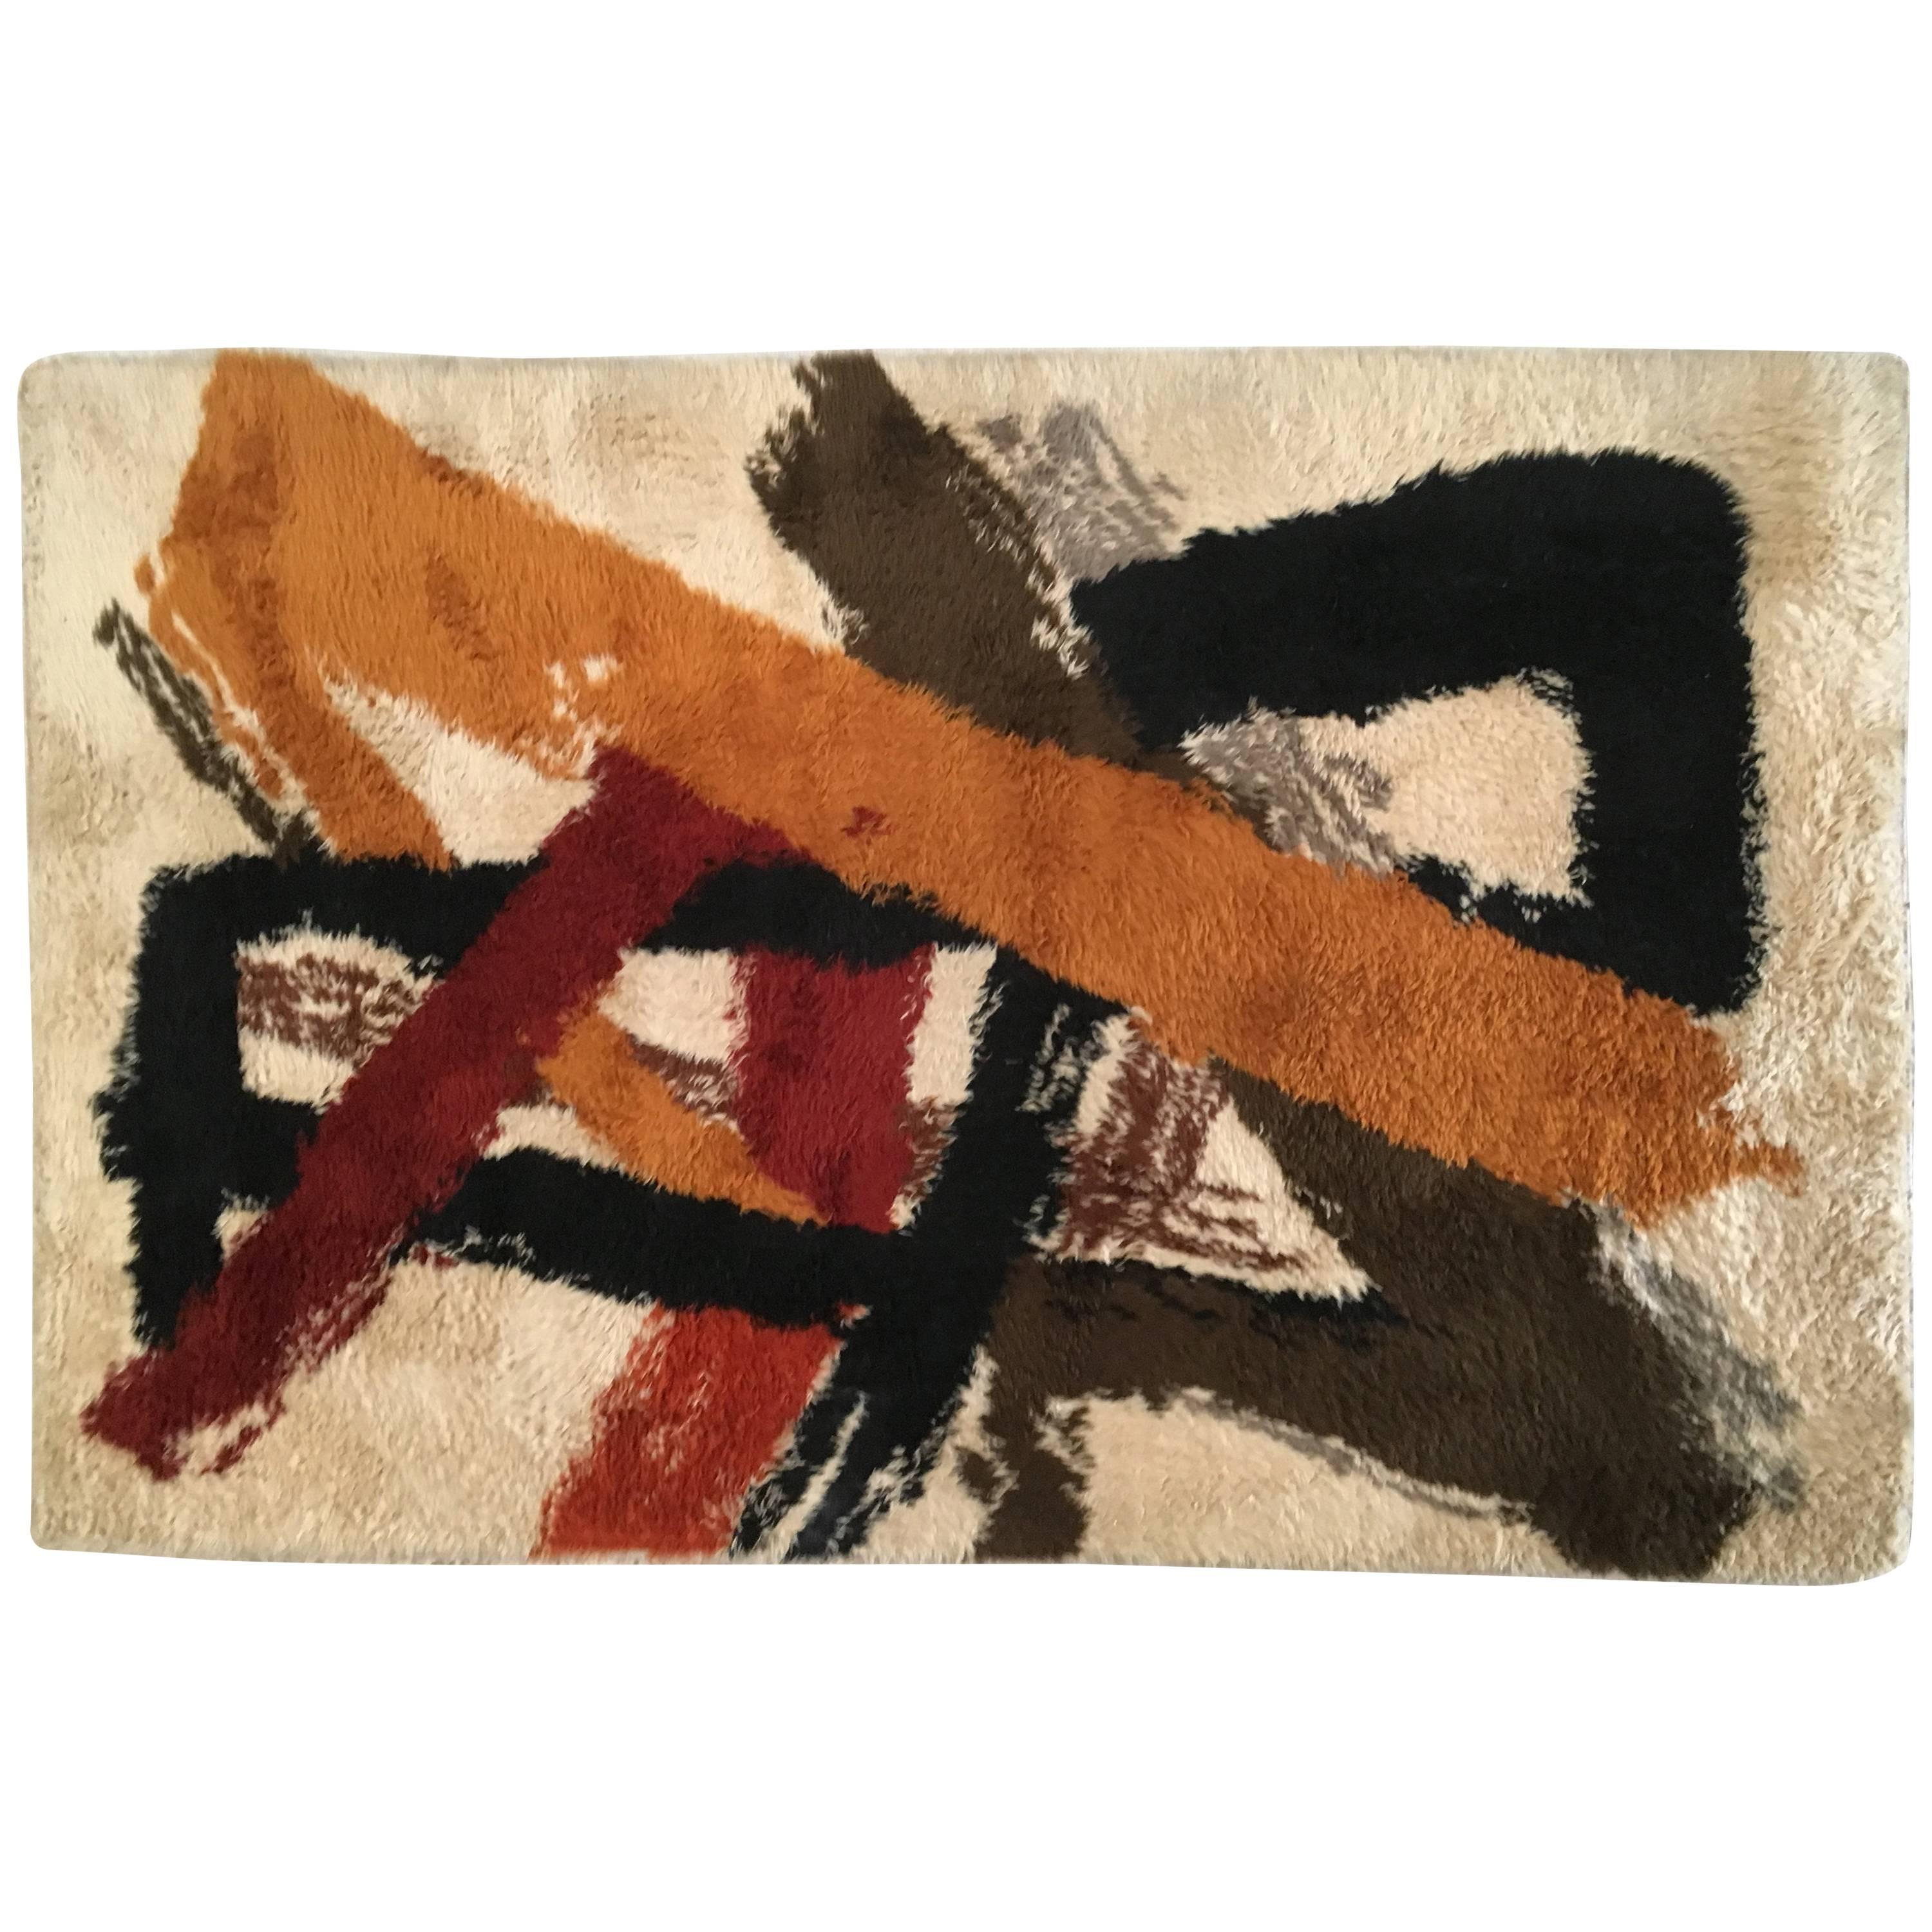 Midcentury Abstract Iconic Carpet Manner of Artist Franz Kline For Sale